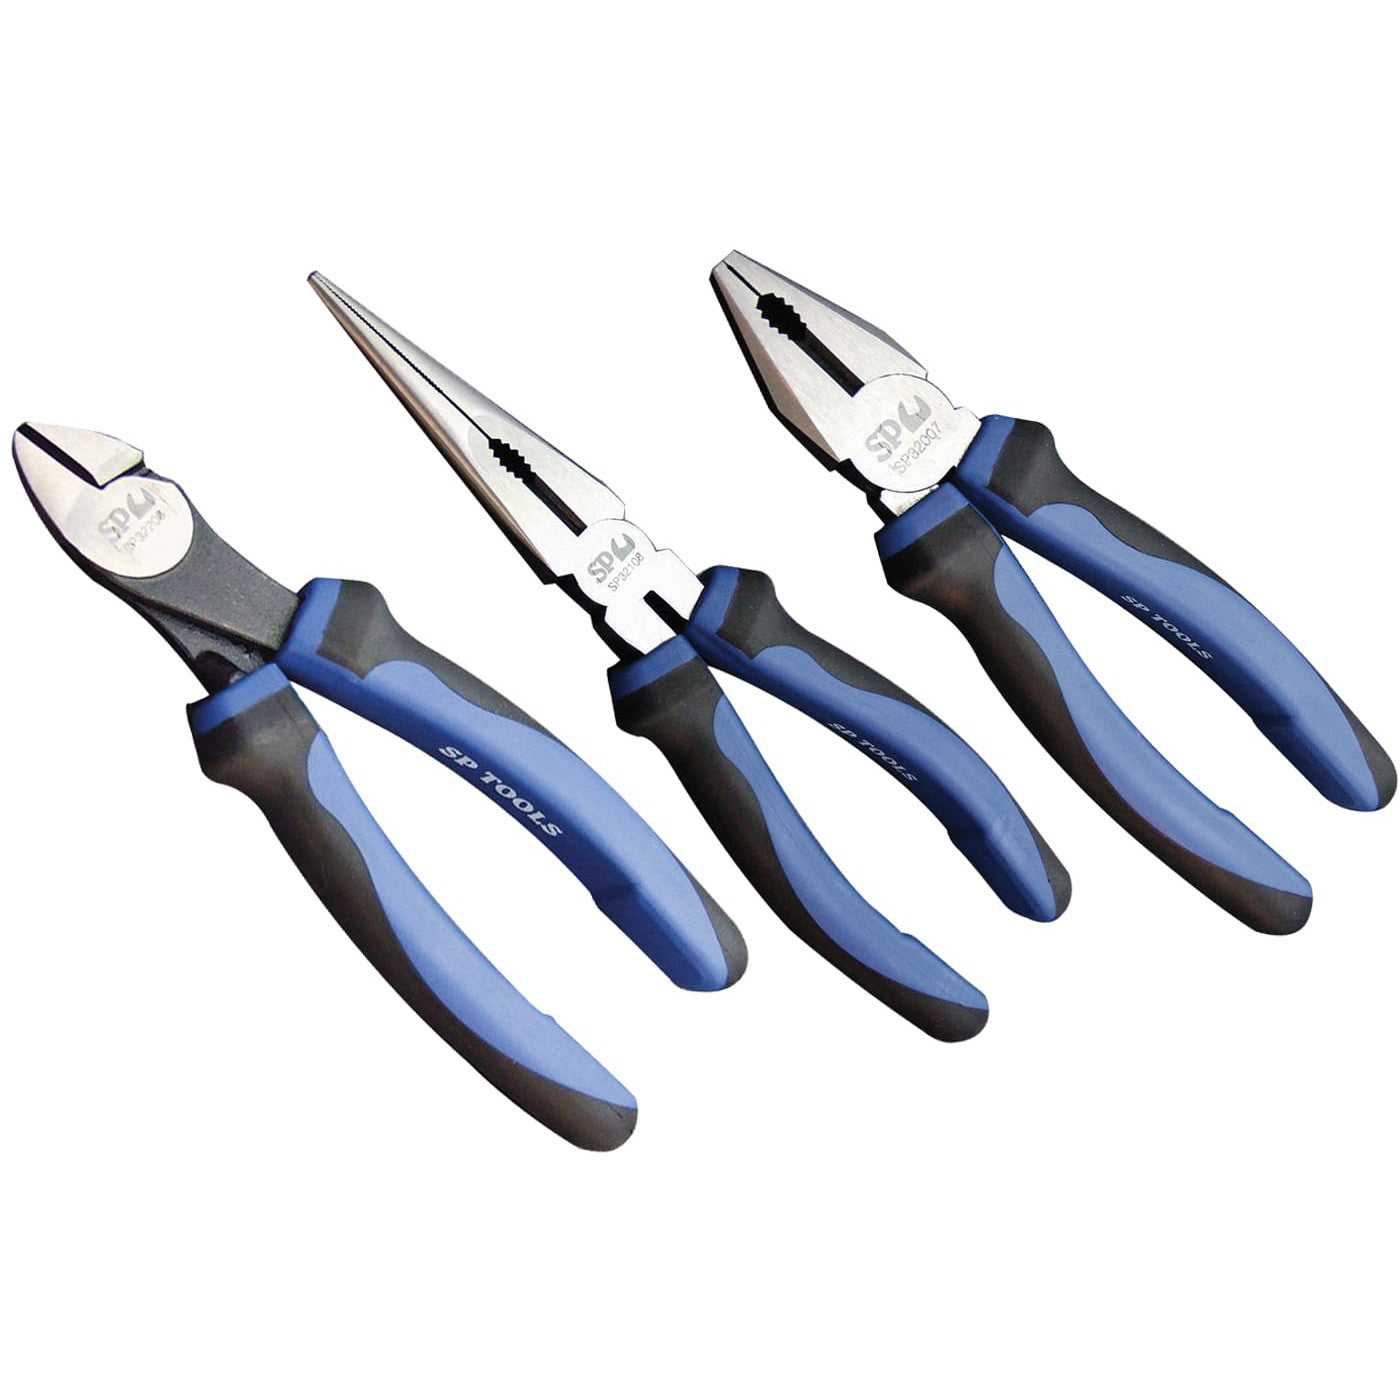 3Pce High Leverage Plier / Cutter Set SP32903 by SP Tools